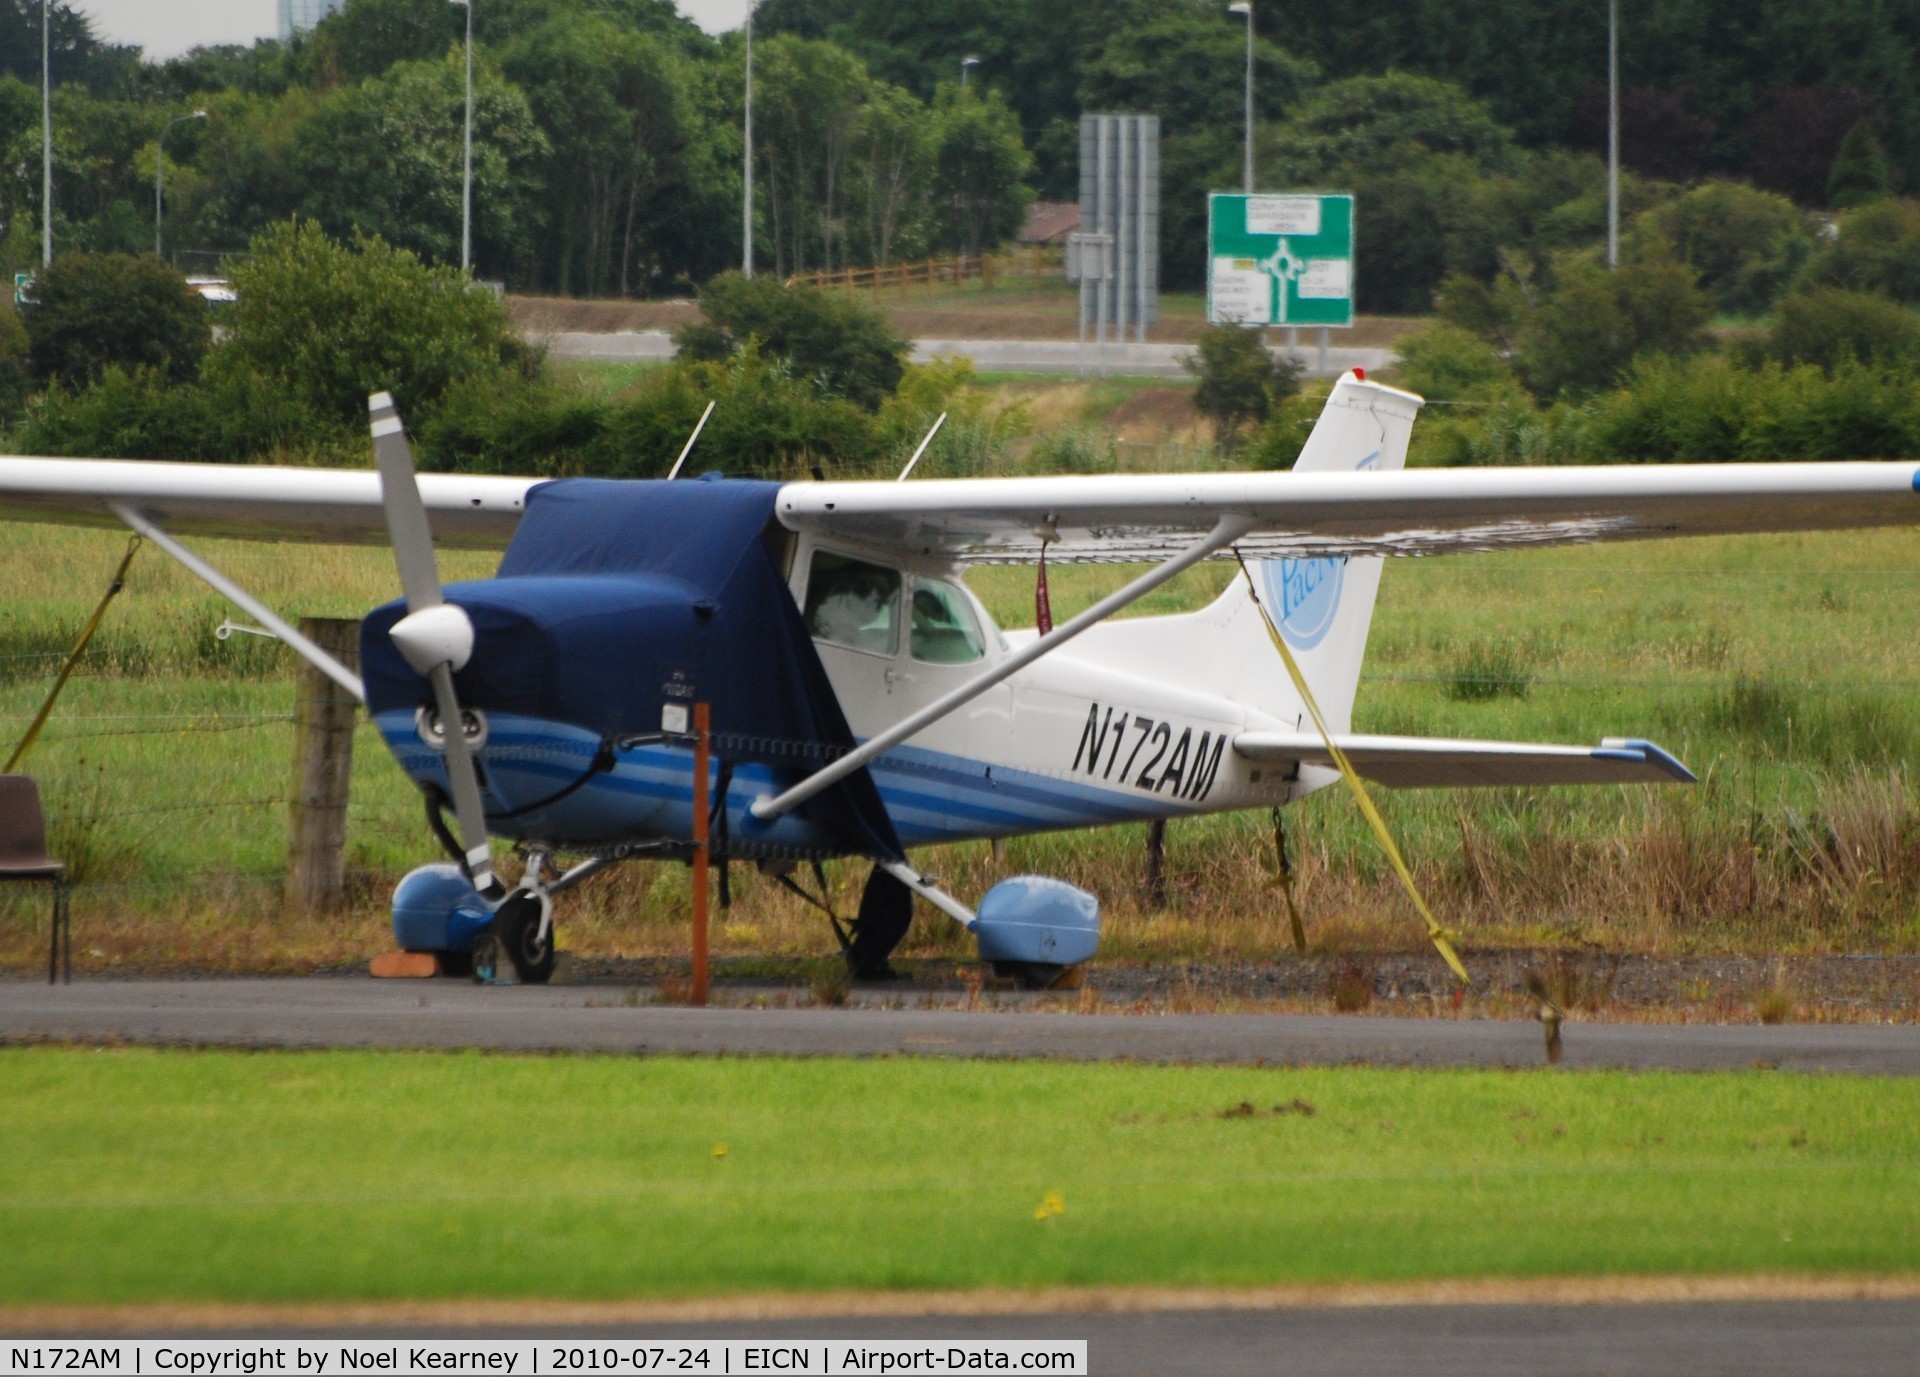 N172AM, 1975 Cessna 172M C/N 17264993, Well-secured against the North Atlantic weather.